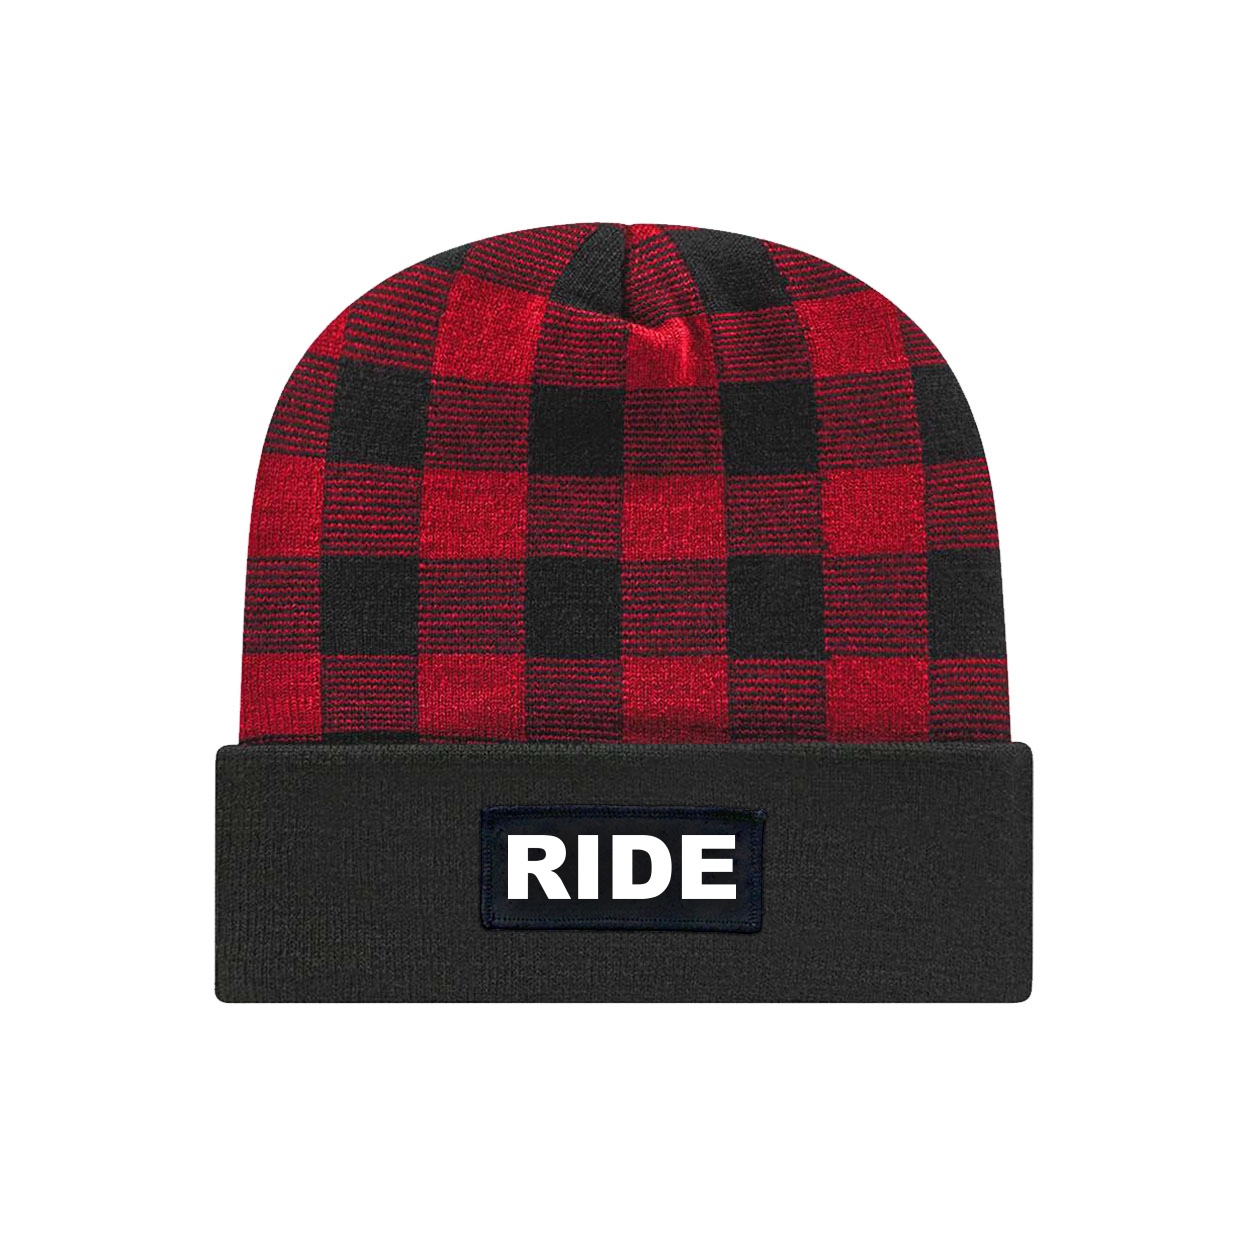 Ride Brand Logo Night Out Woven Patch Roll Up Plaid Beanie Black/True Red